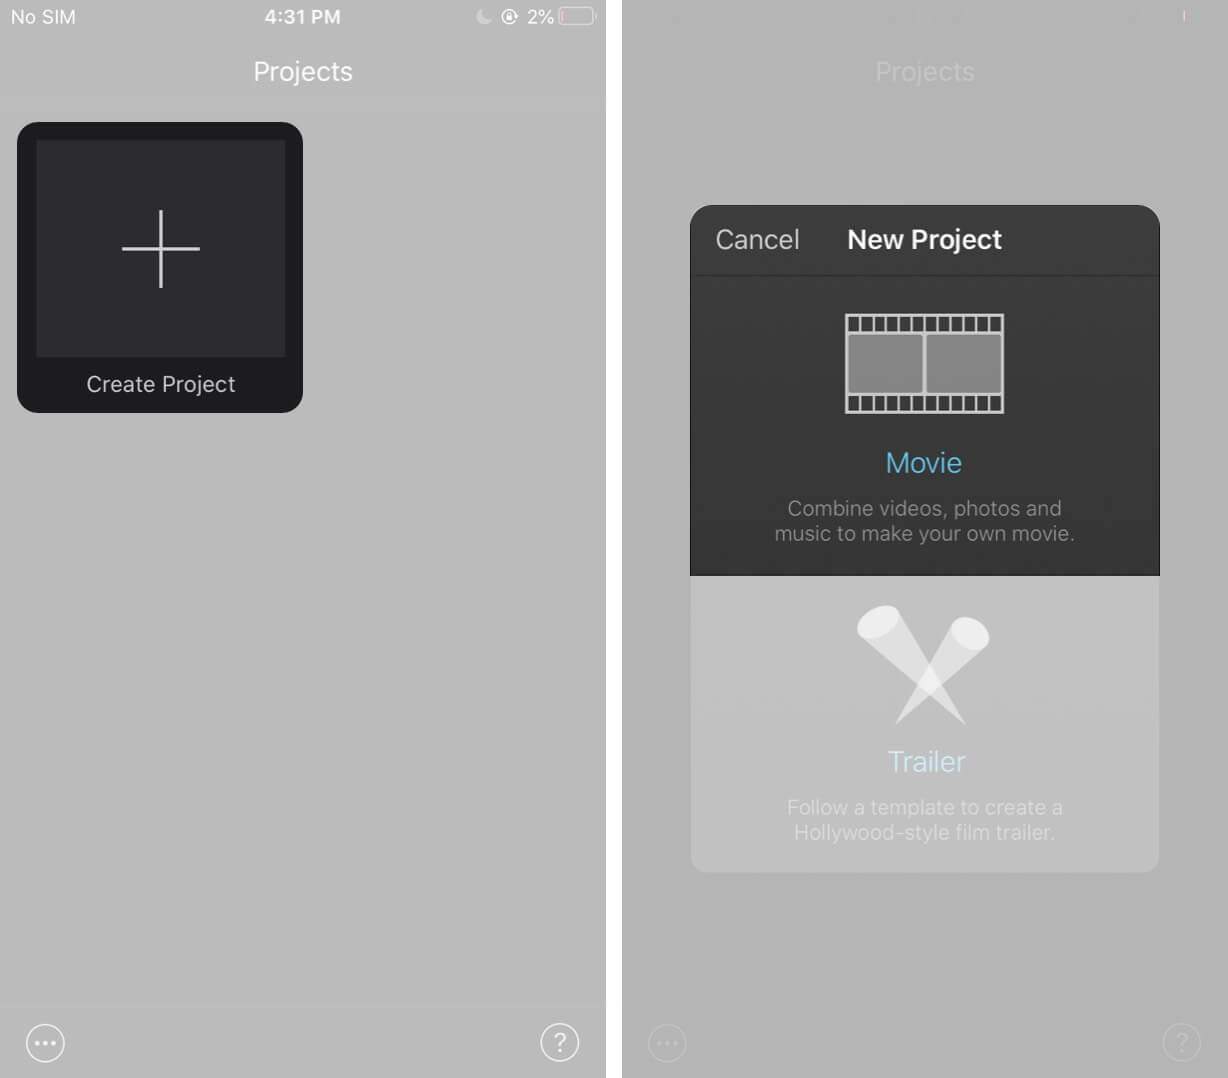 Tap on Create Project and Then Tap on Movie